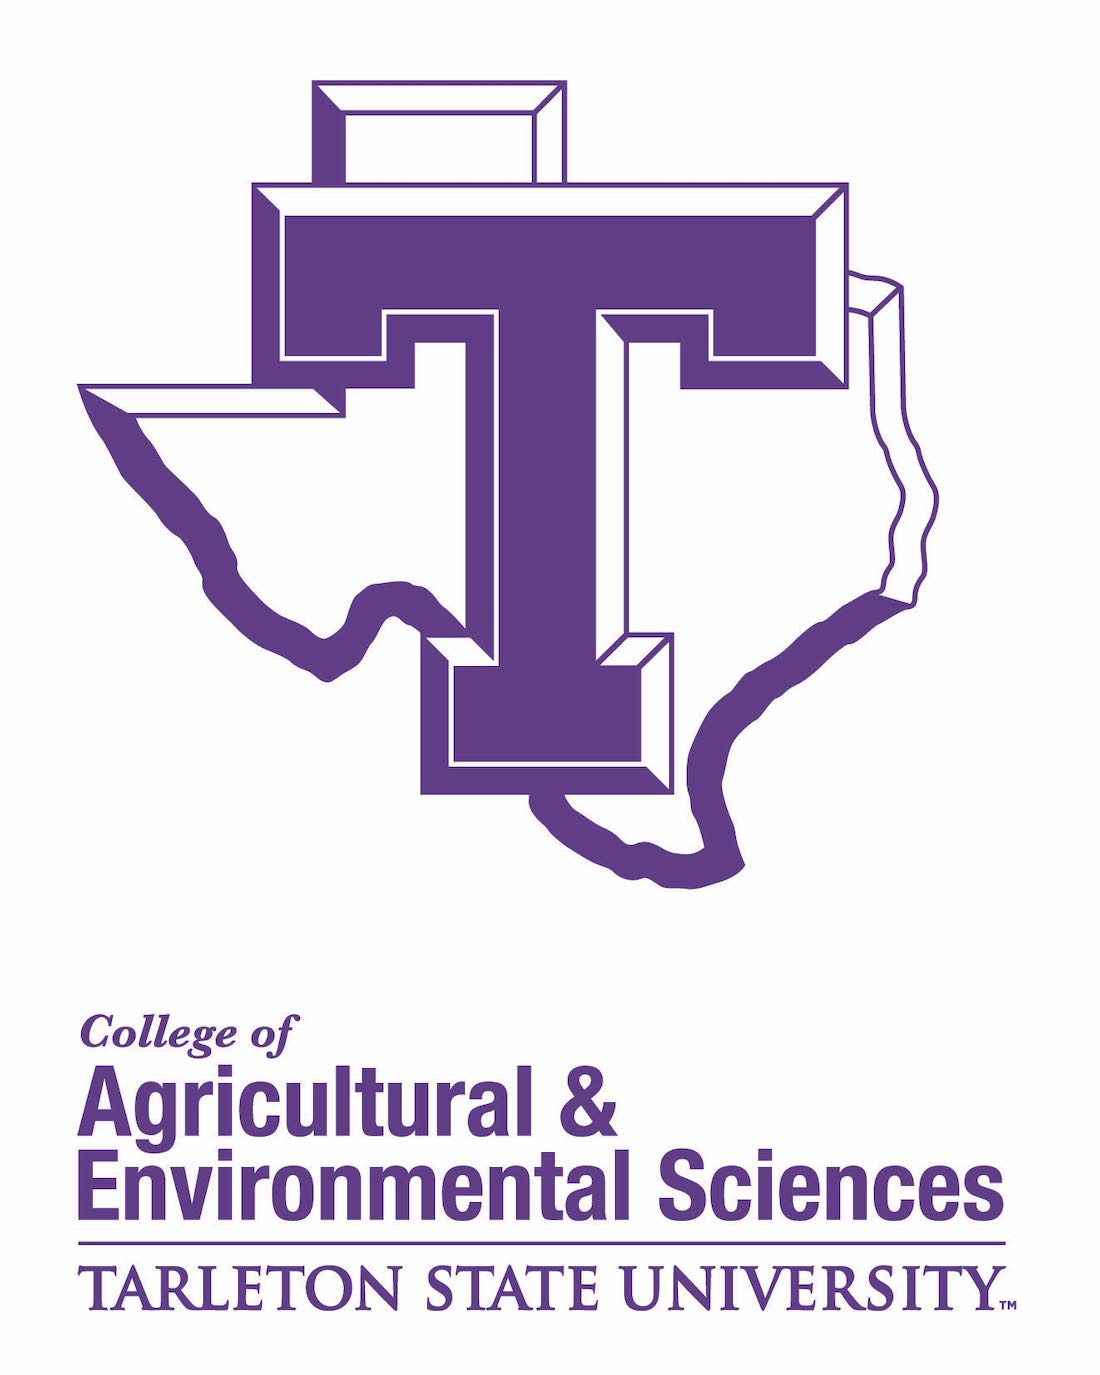 Tarleton State University- College of Agricultural & Environmental Sciences